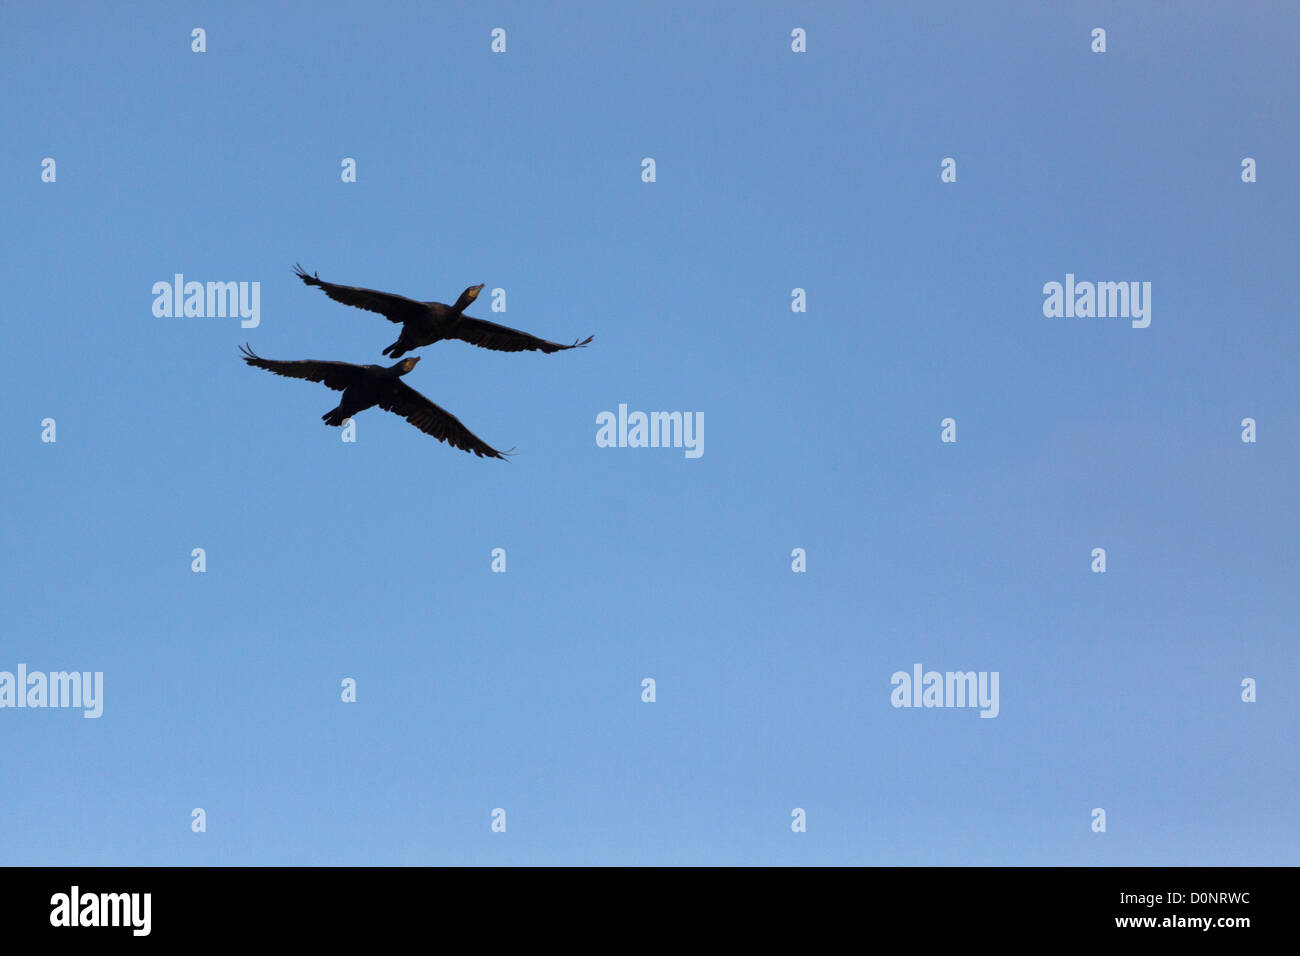 Two birds flying together Stock Photo